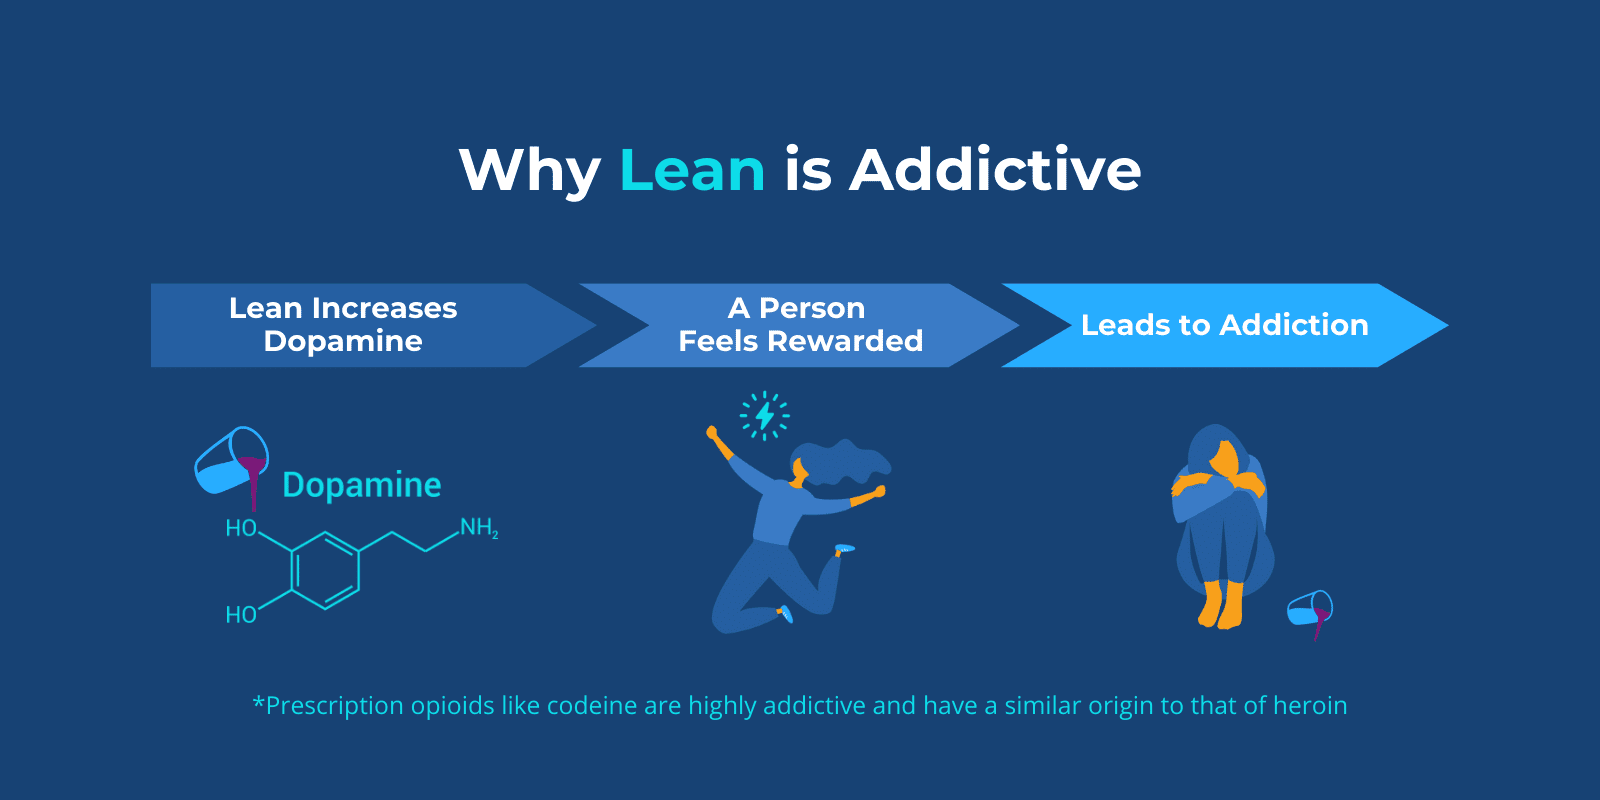 "Why Lean Is Addictive" title written above a 3 step progress graphic that demonstrates why lean is addictive with relevant graphics